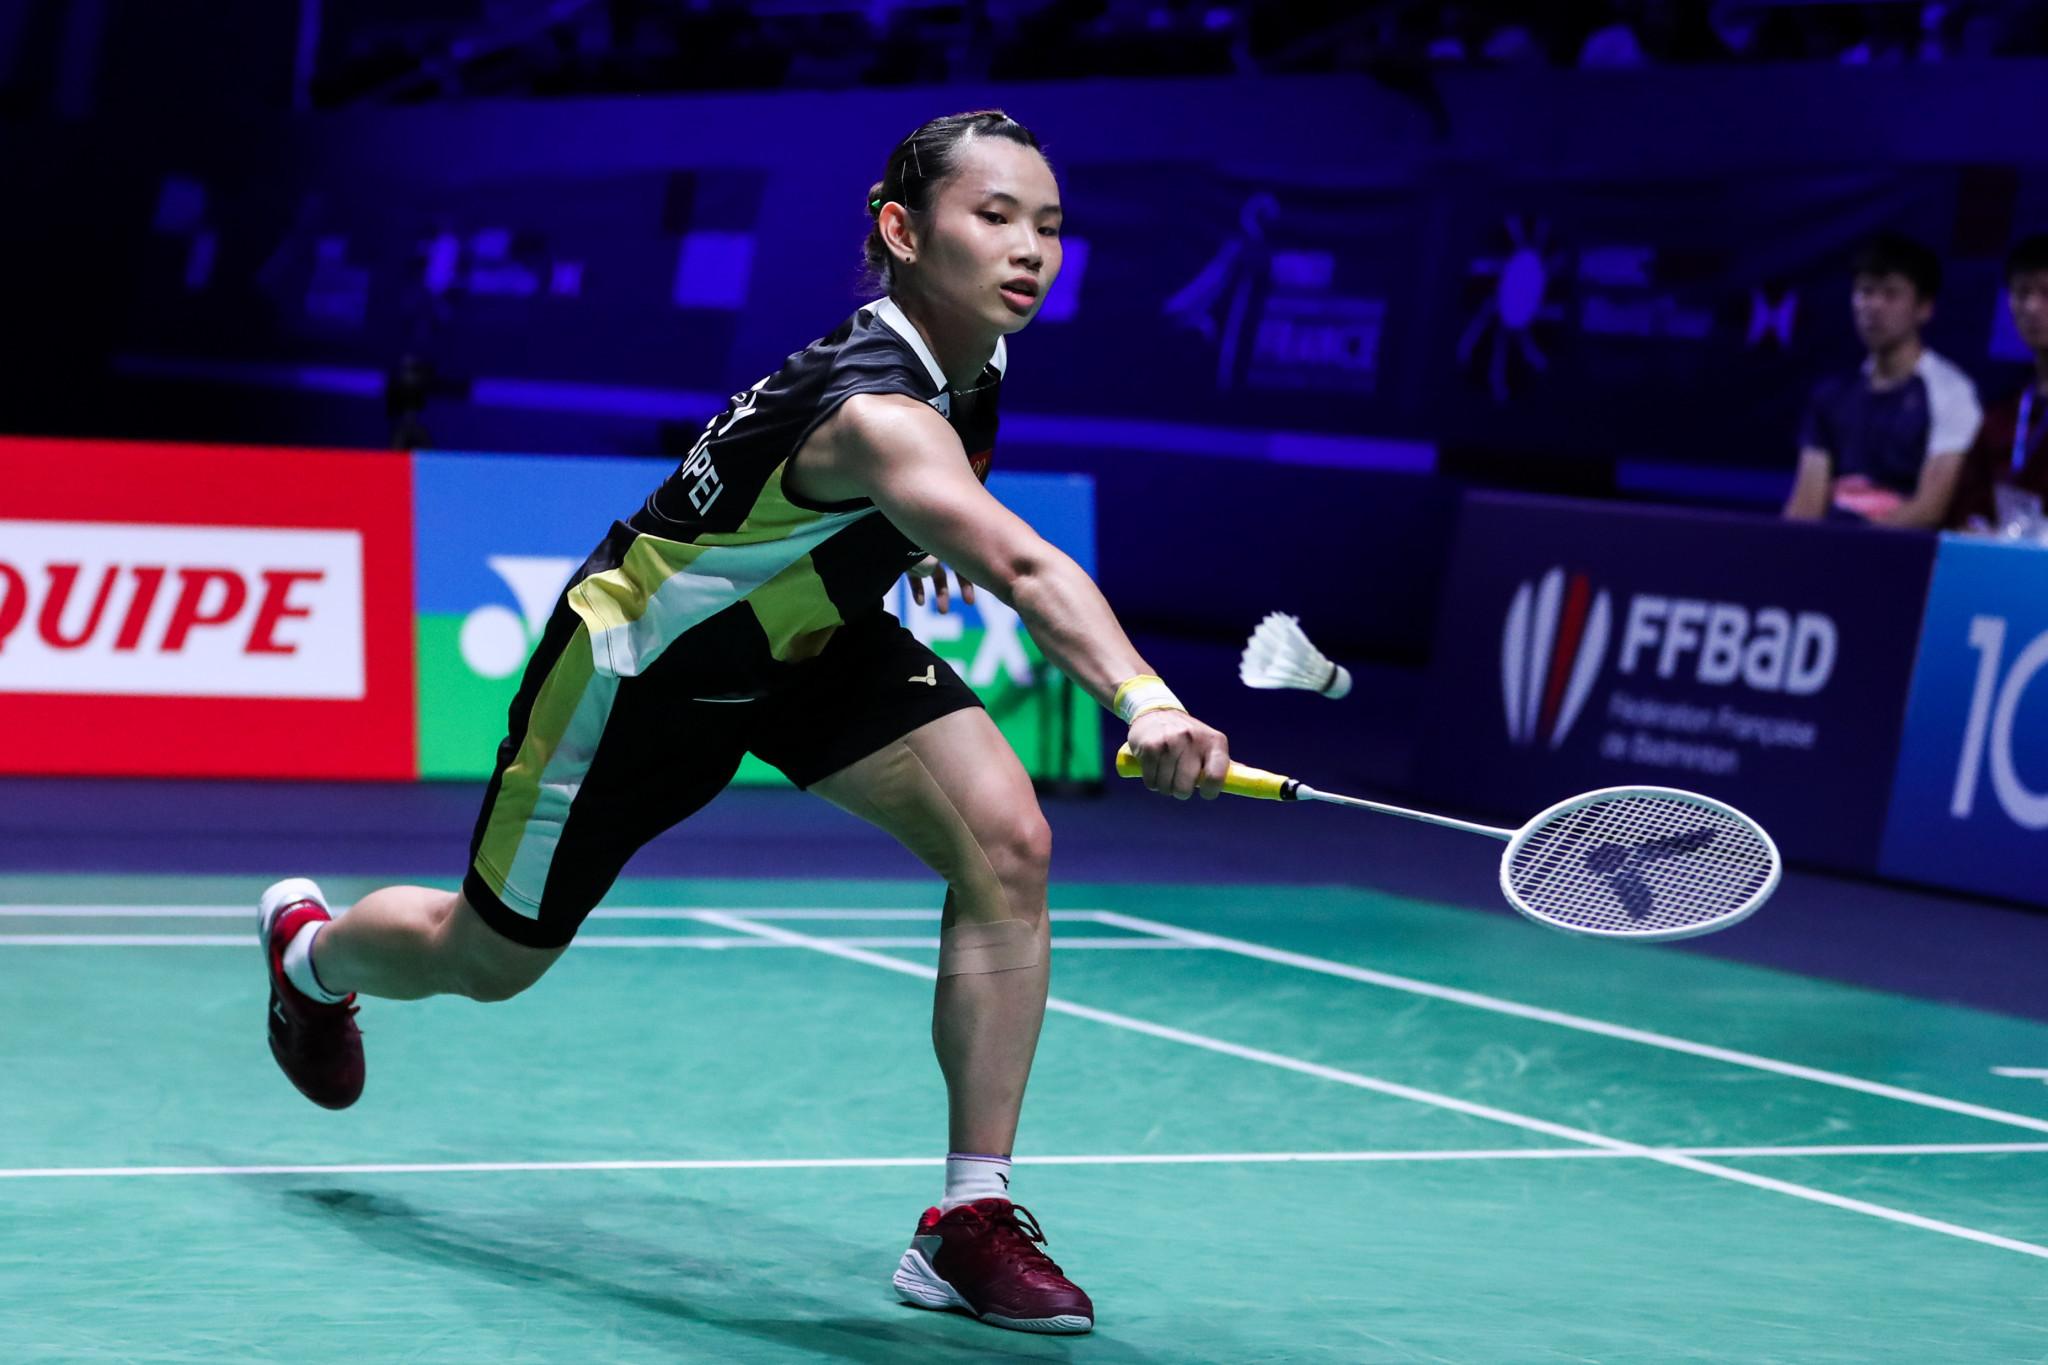 Top seed Tai Tzu-Ying will compete in the women's semi-finals ©Getty Images